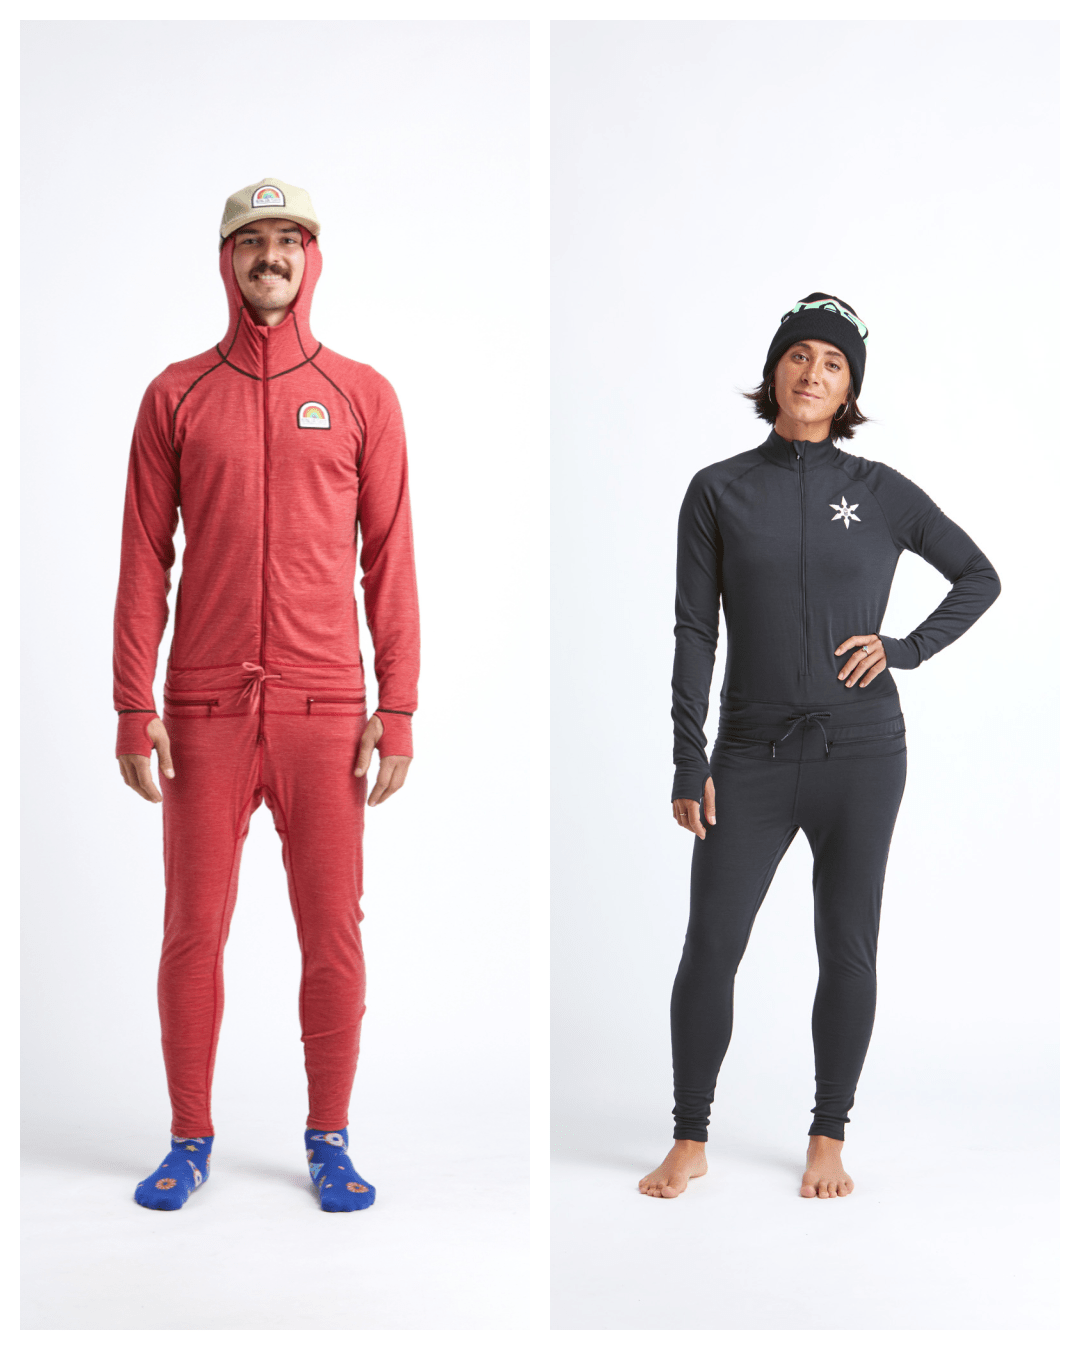 Ninja Suits - The Best Baselayer on the Planet is Ready for Winter Adv